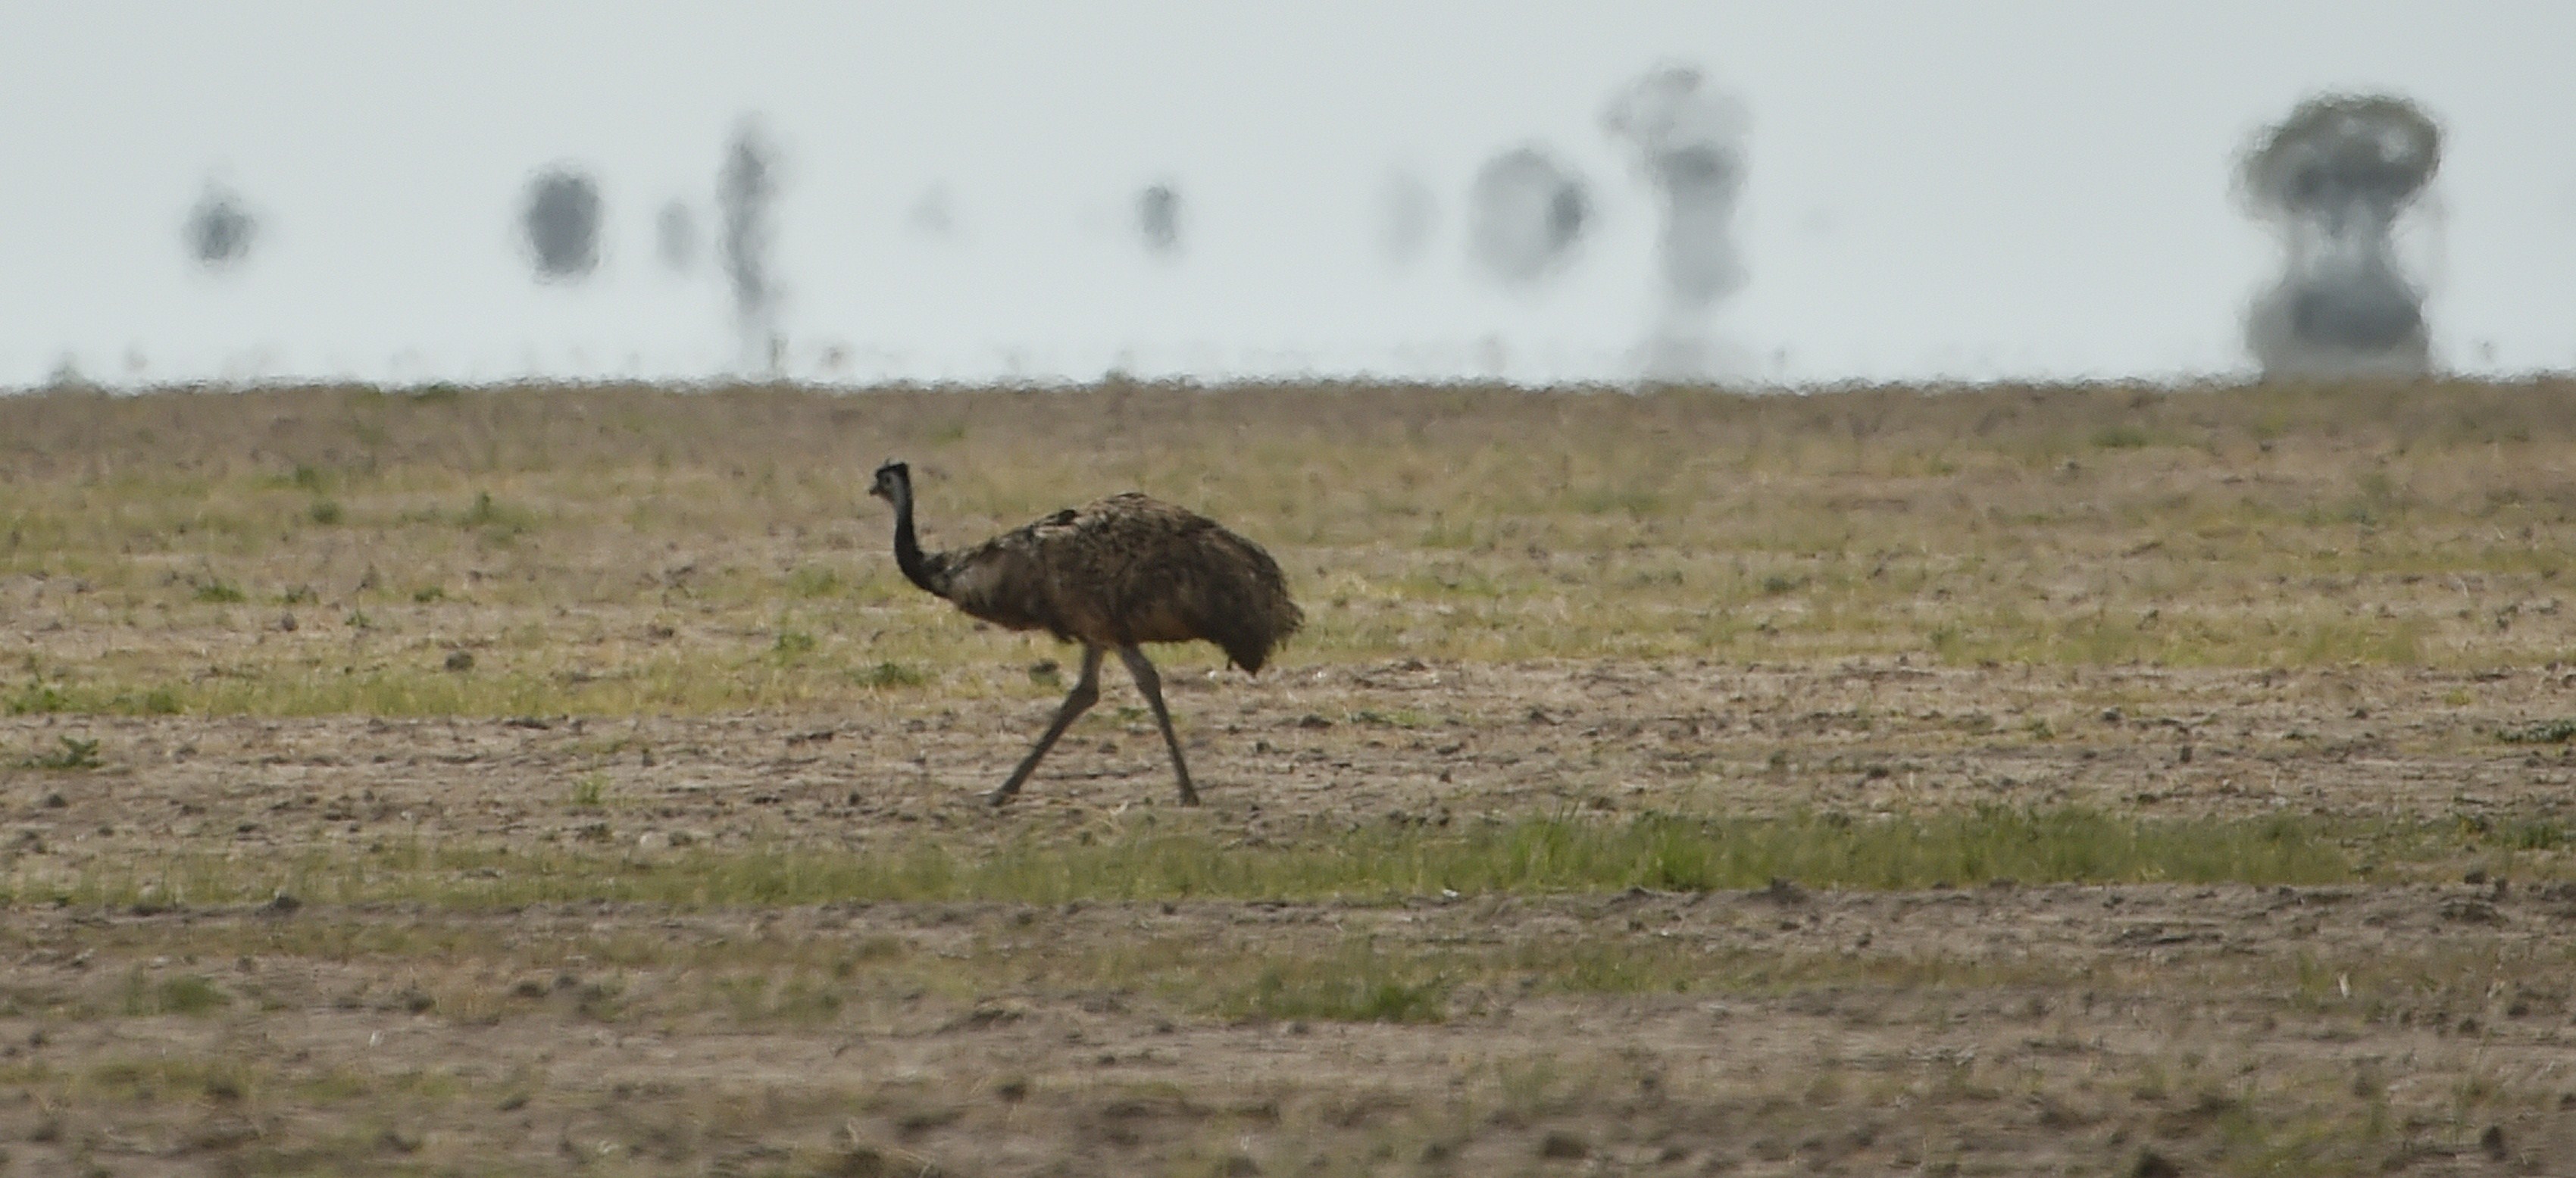 An emu looks for food in the dry earth near the Australian agricultural town of Walgett. (Peter Parks&mdash;AFP/Getty Images)